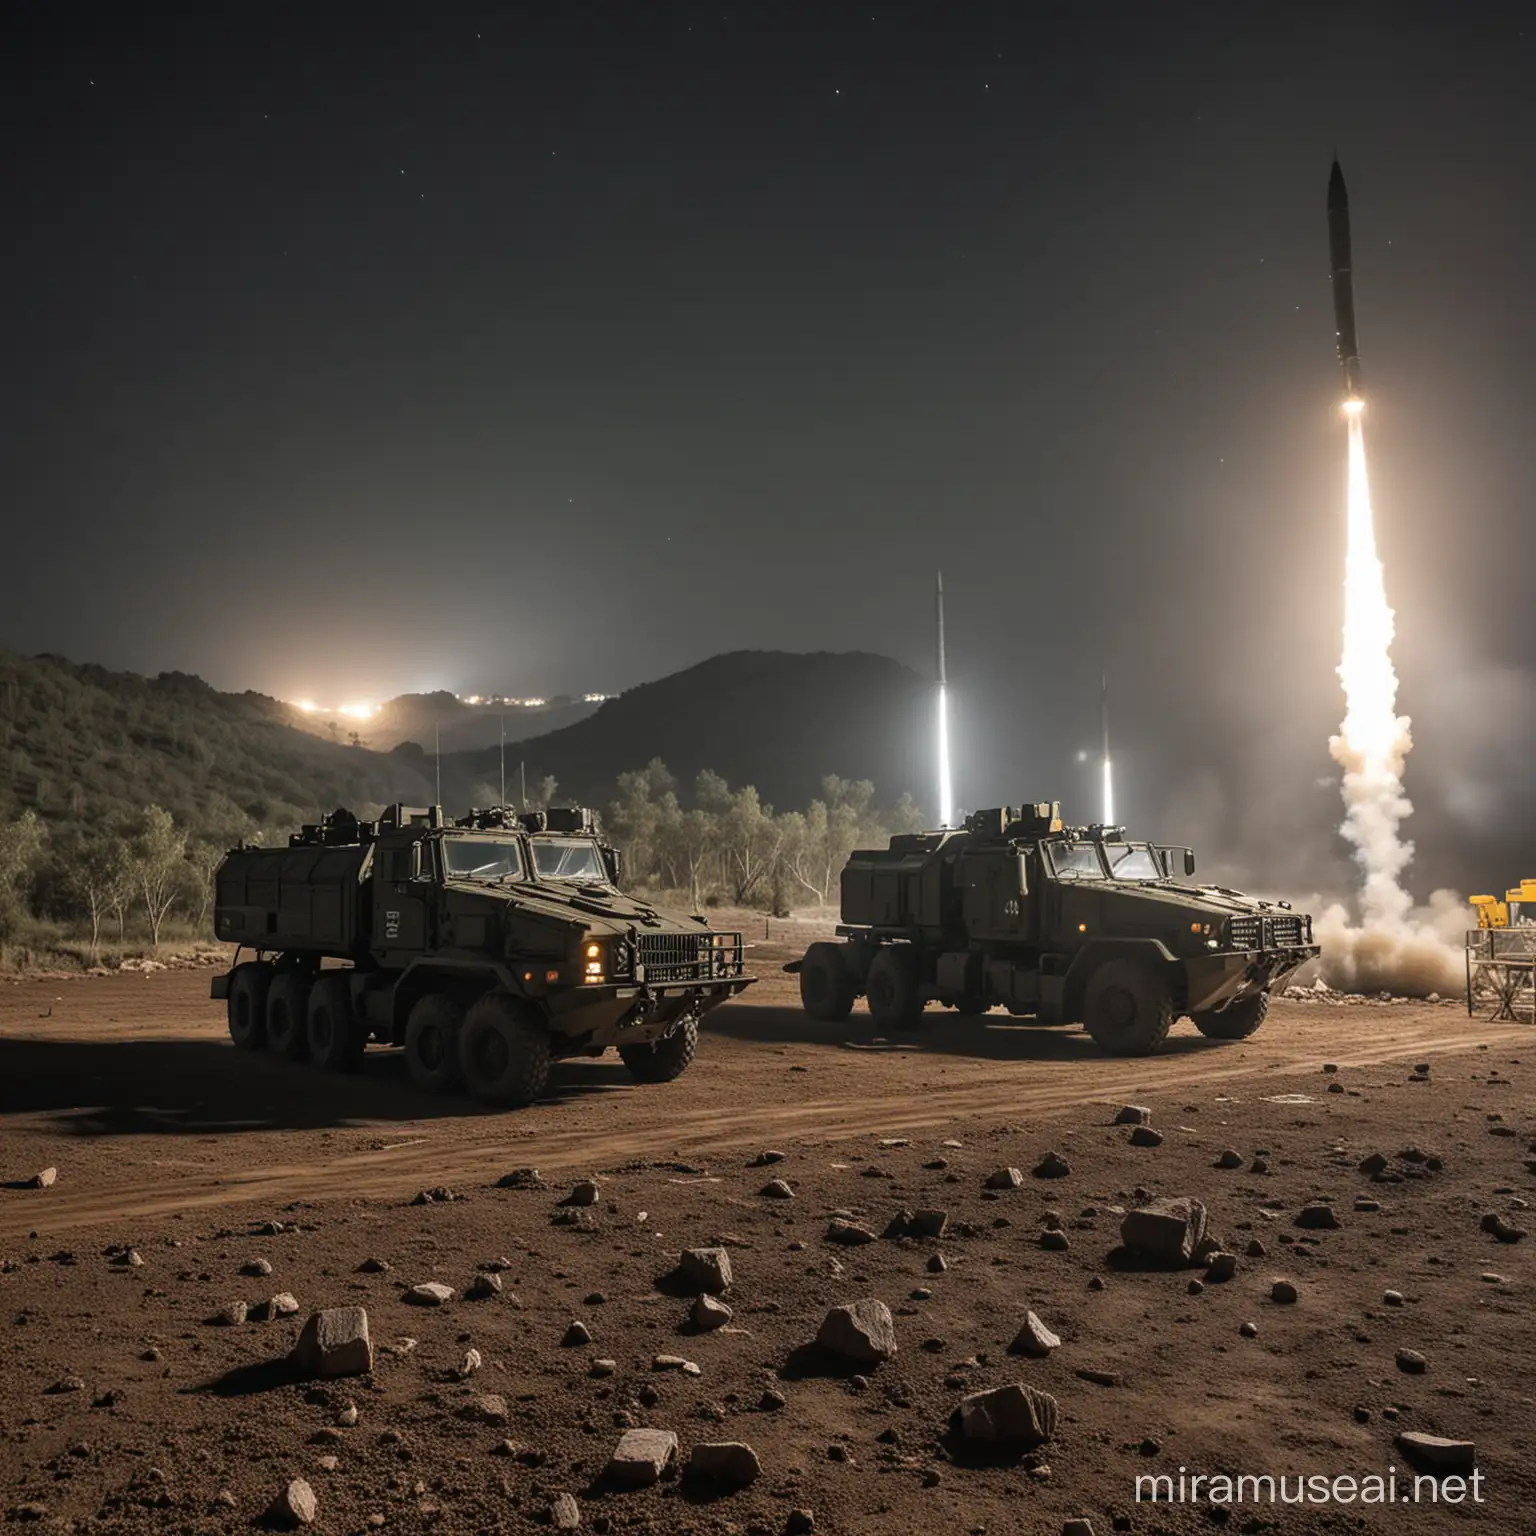 Nighttime Military Drill Launching SurfacetoSurface Missiles in Remote Location